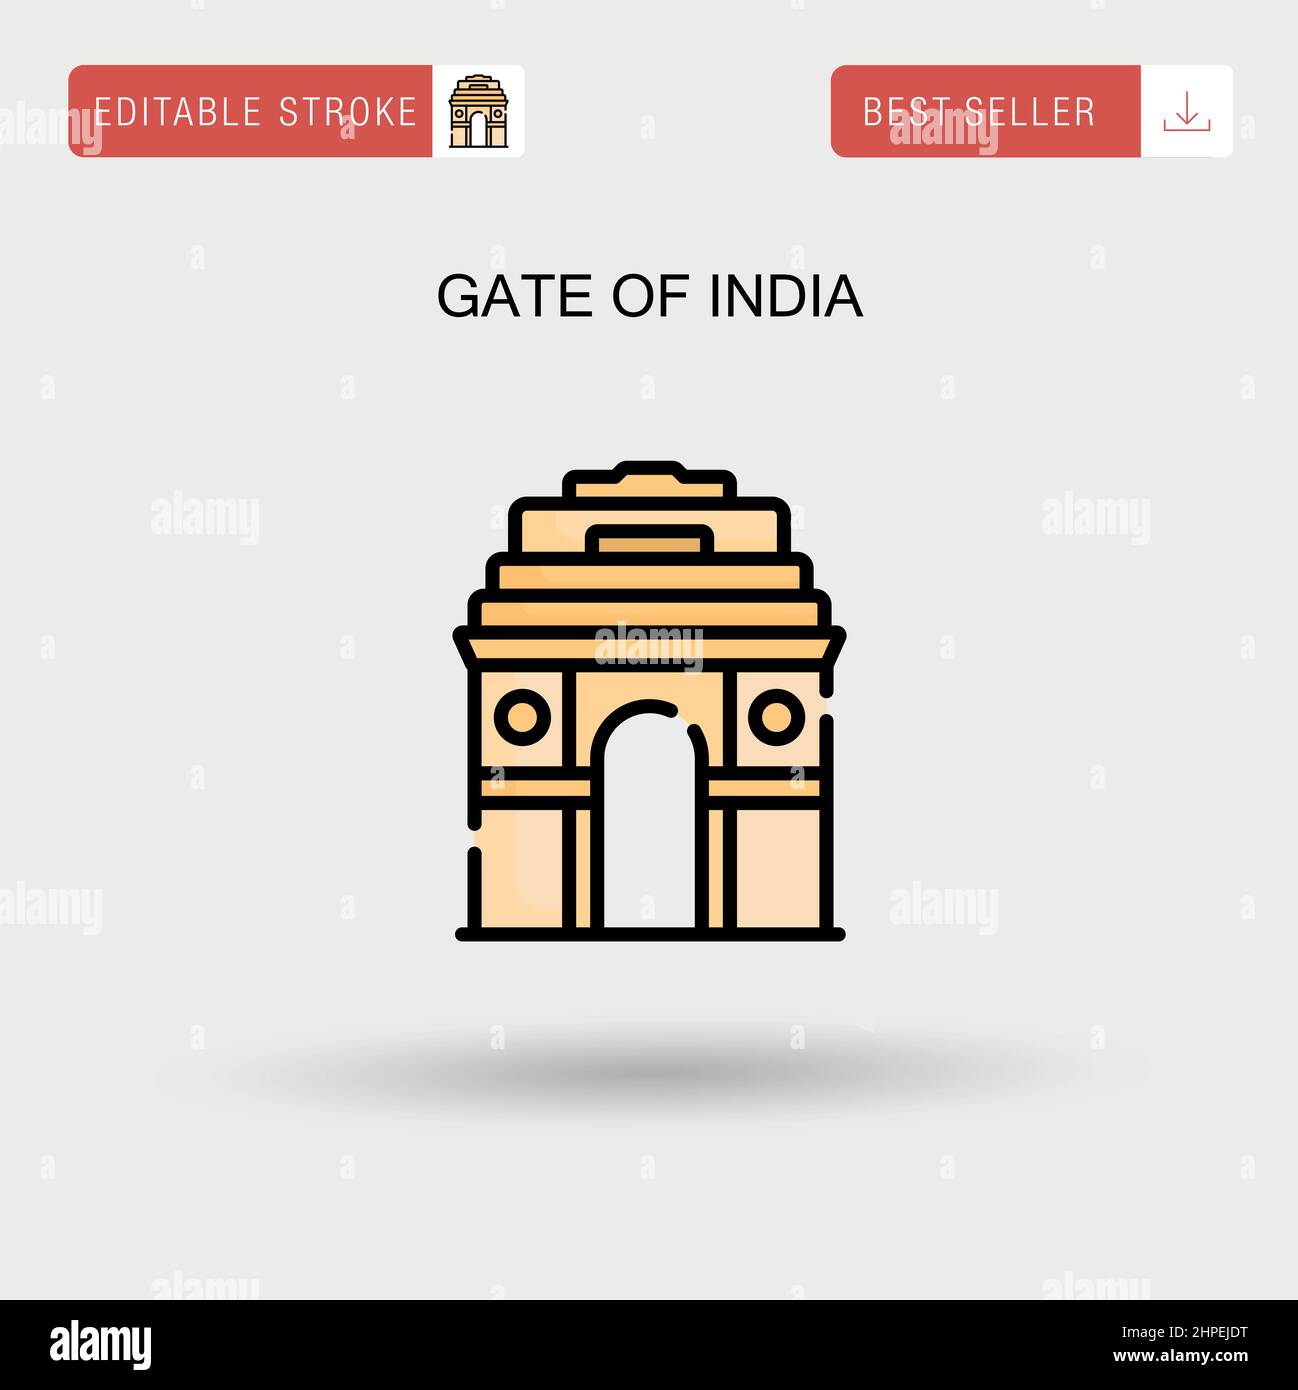 Gate of india Simple vector icon. Stock Vector